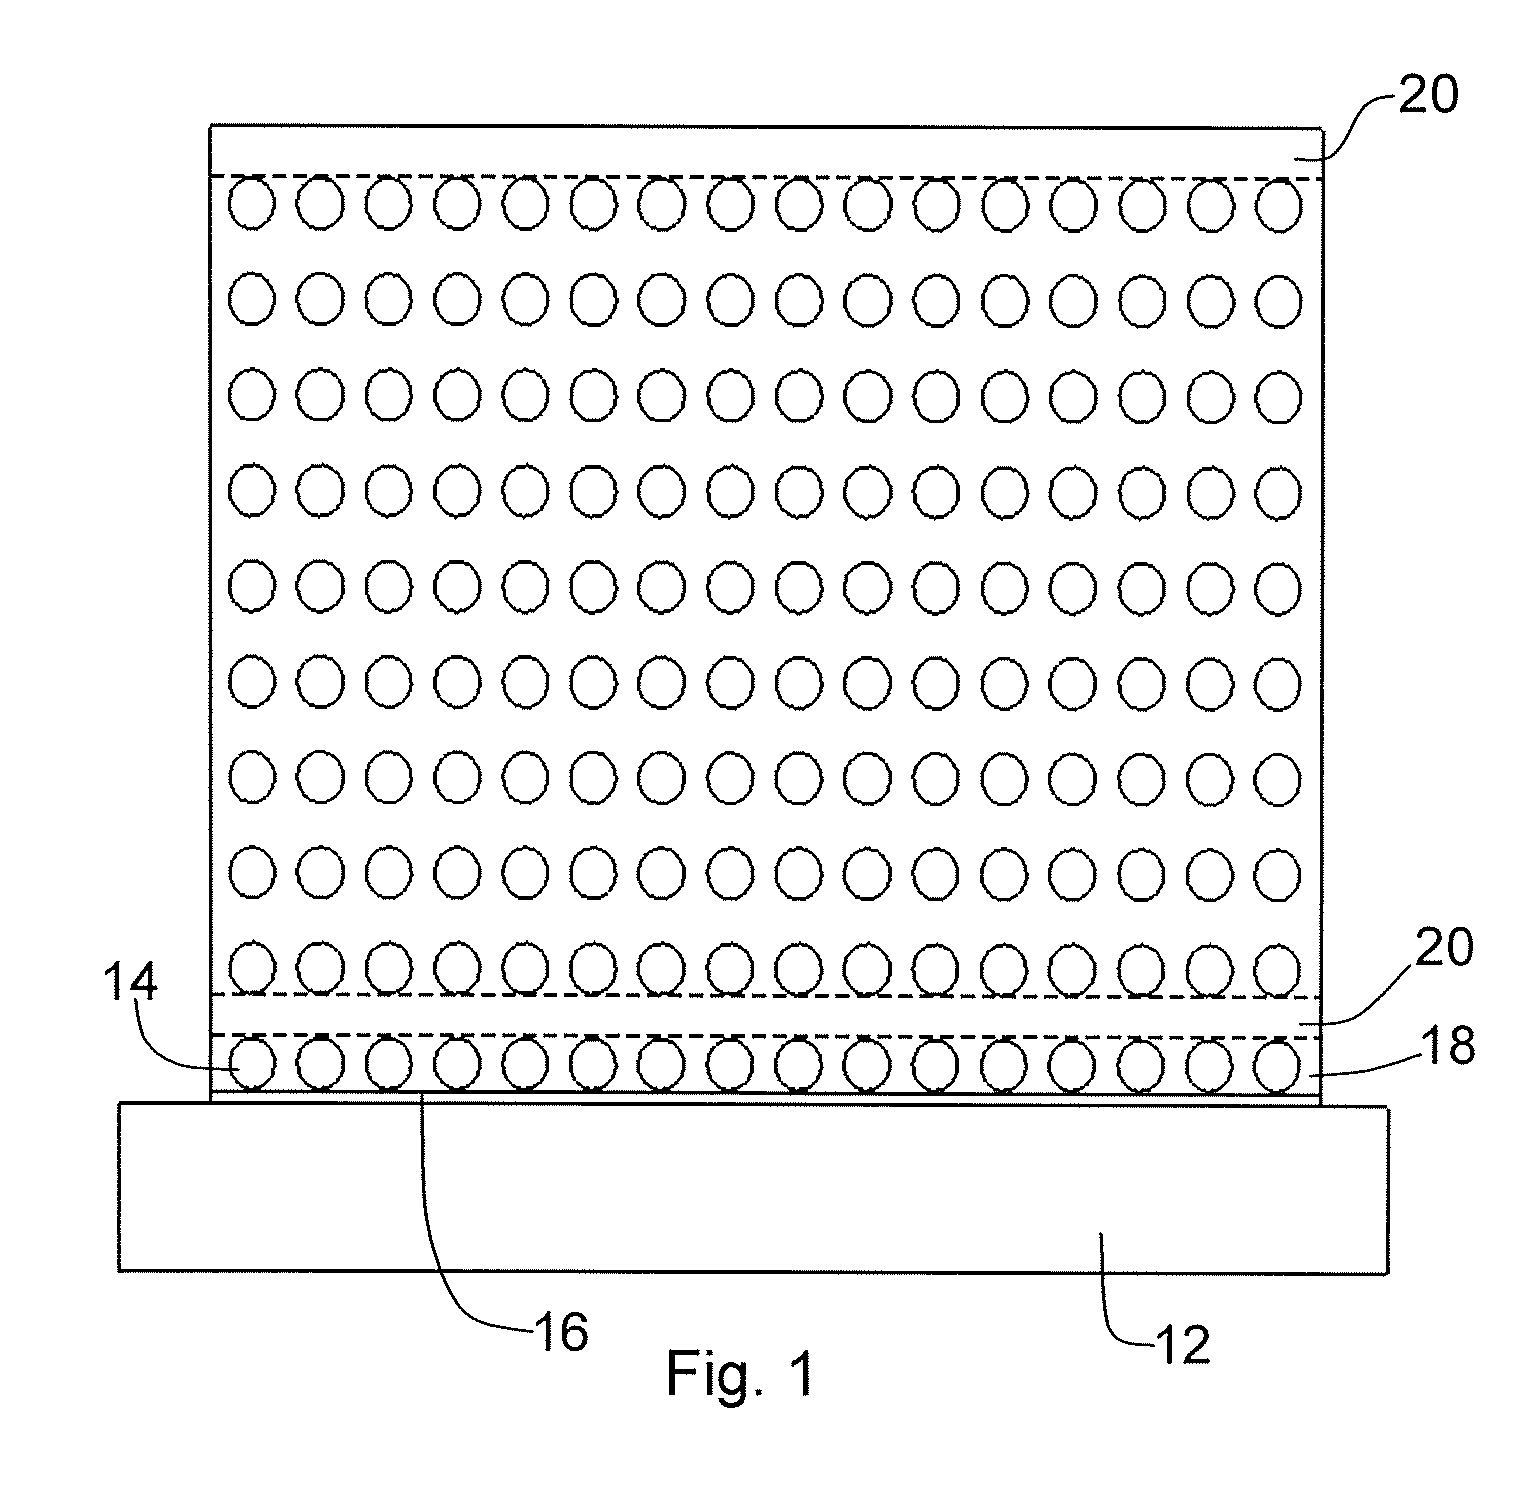 Nano-structured dielectric composite